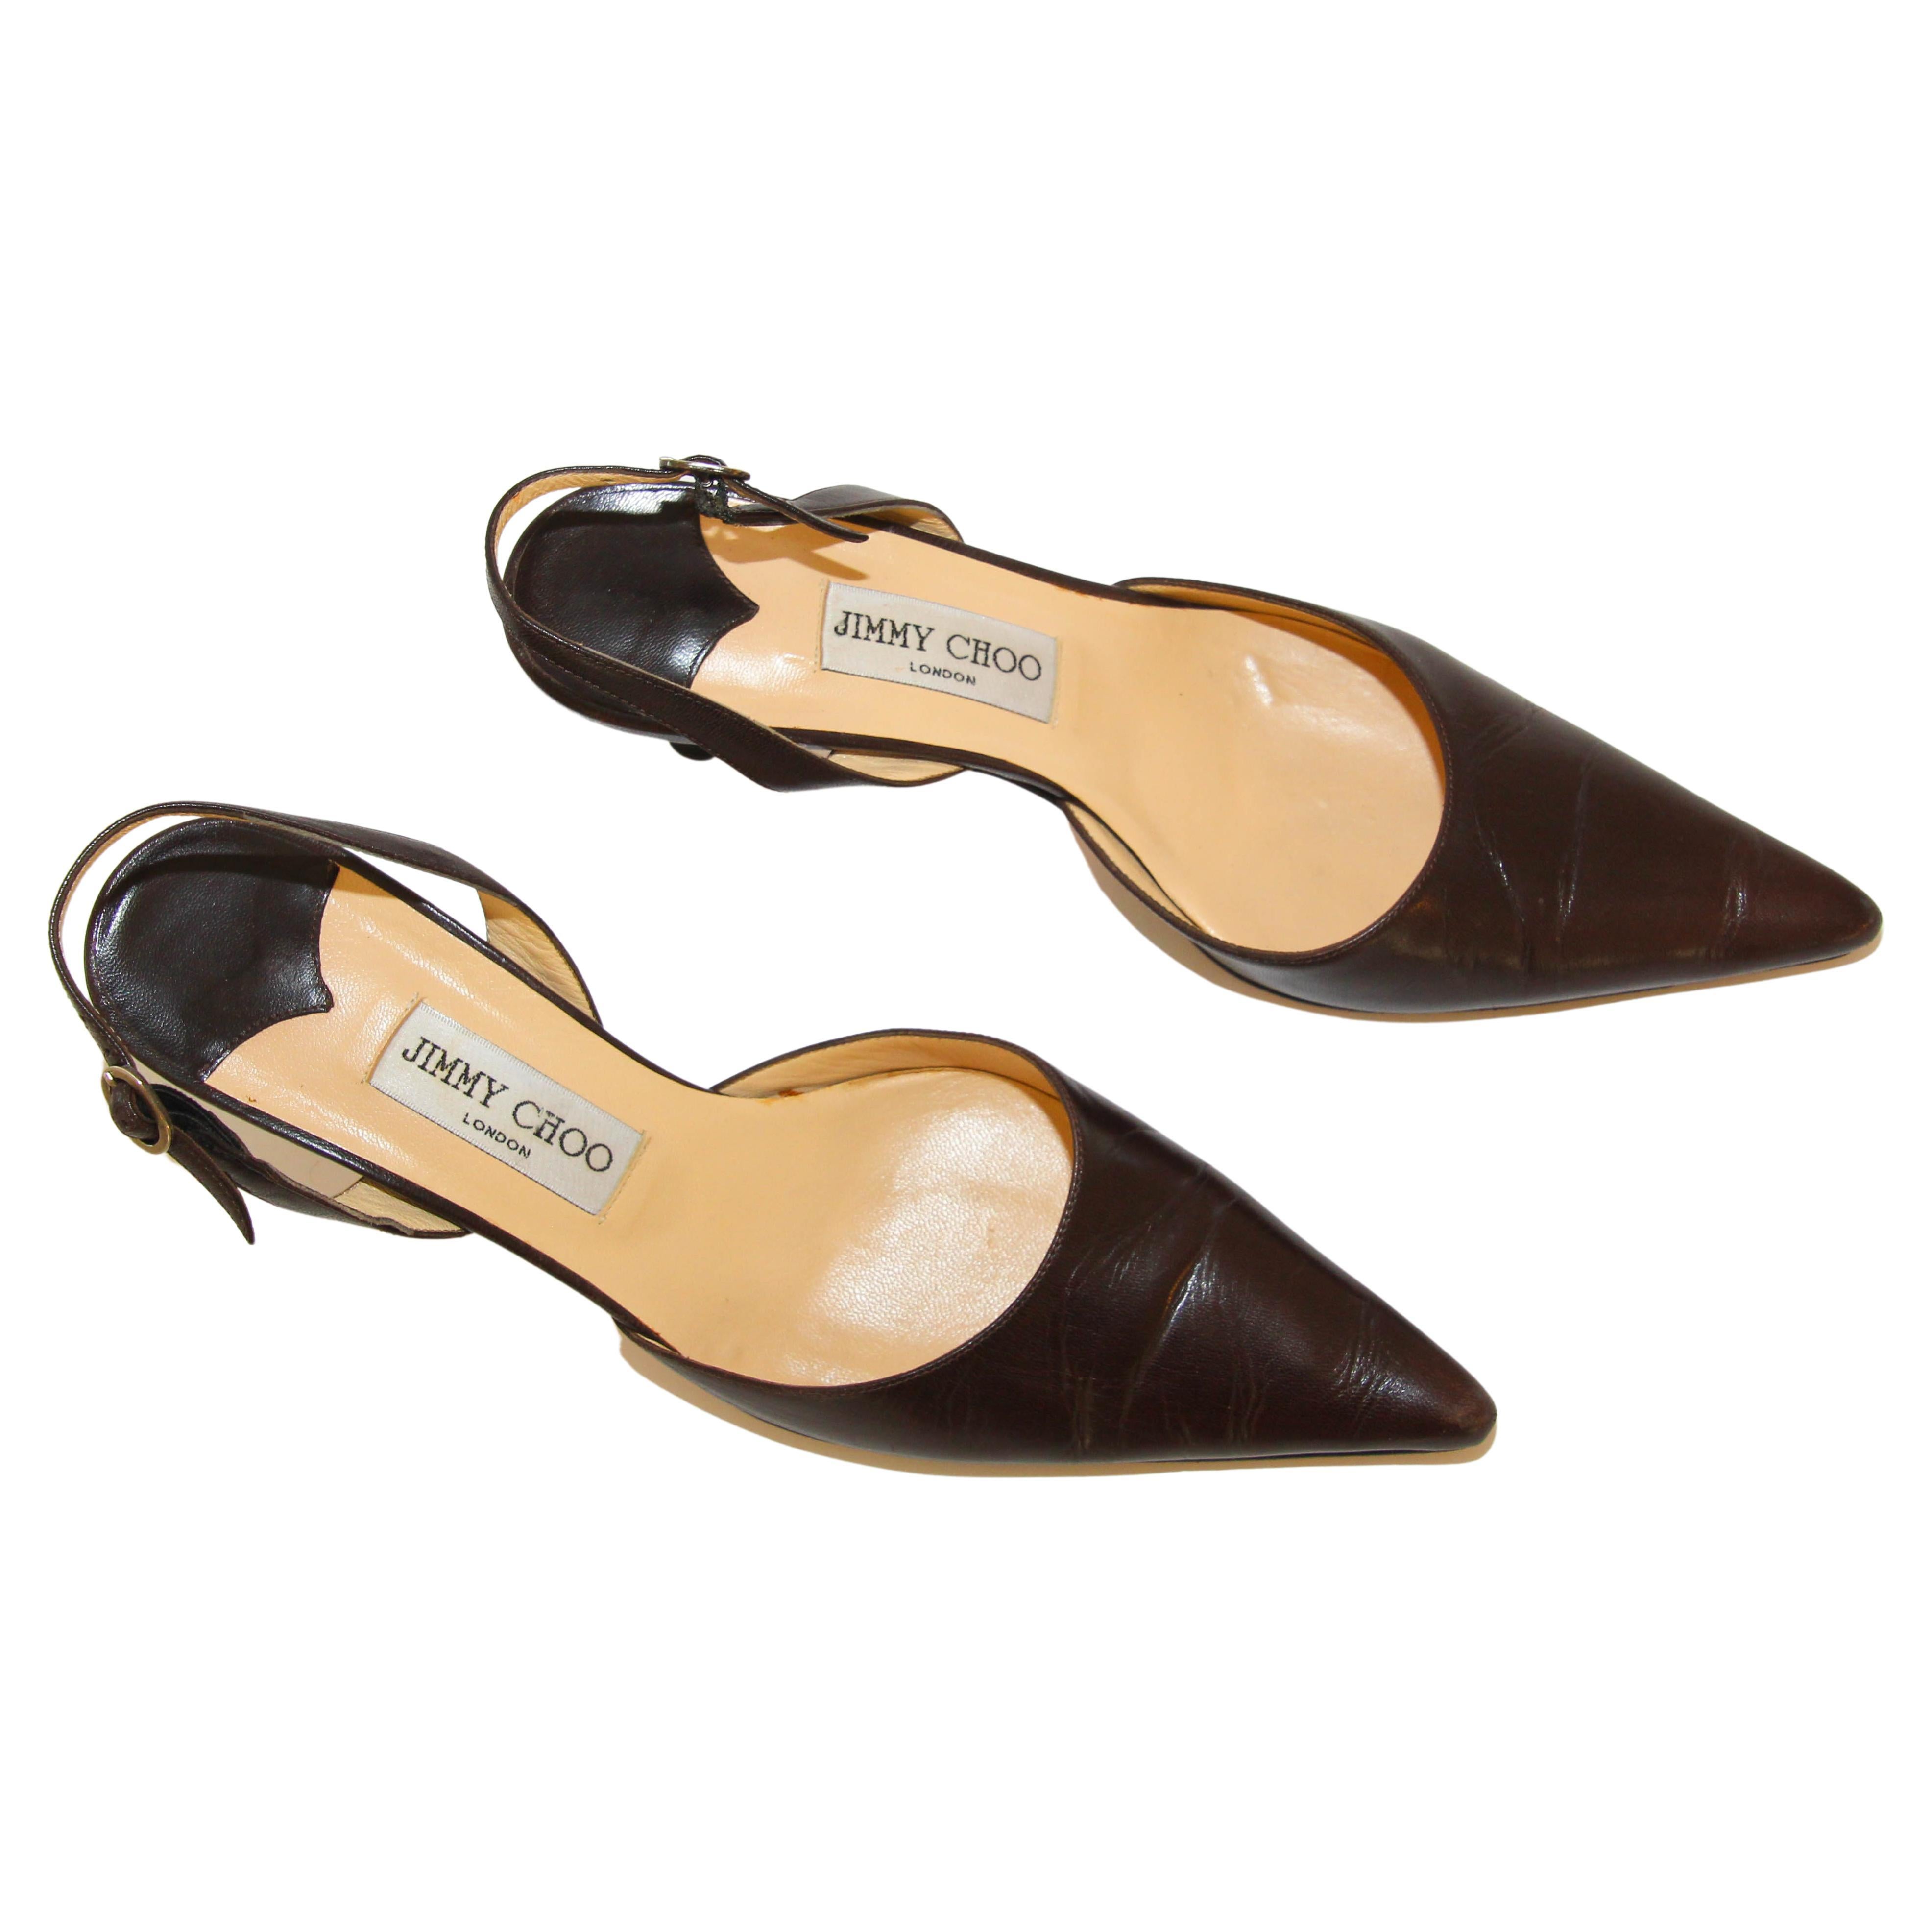 Jimmy Choo Dark Brown Leather Sling Backs Pointed Toe.
Brown Leather Slingback Pumps By Jimmy Choo London. 
Versatile Classic look that is timeless. 
Heel Height Is 2.75 Inches. 
Made In Italy. Size 39.5.
A classic shoe that can be dressed up or